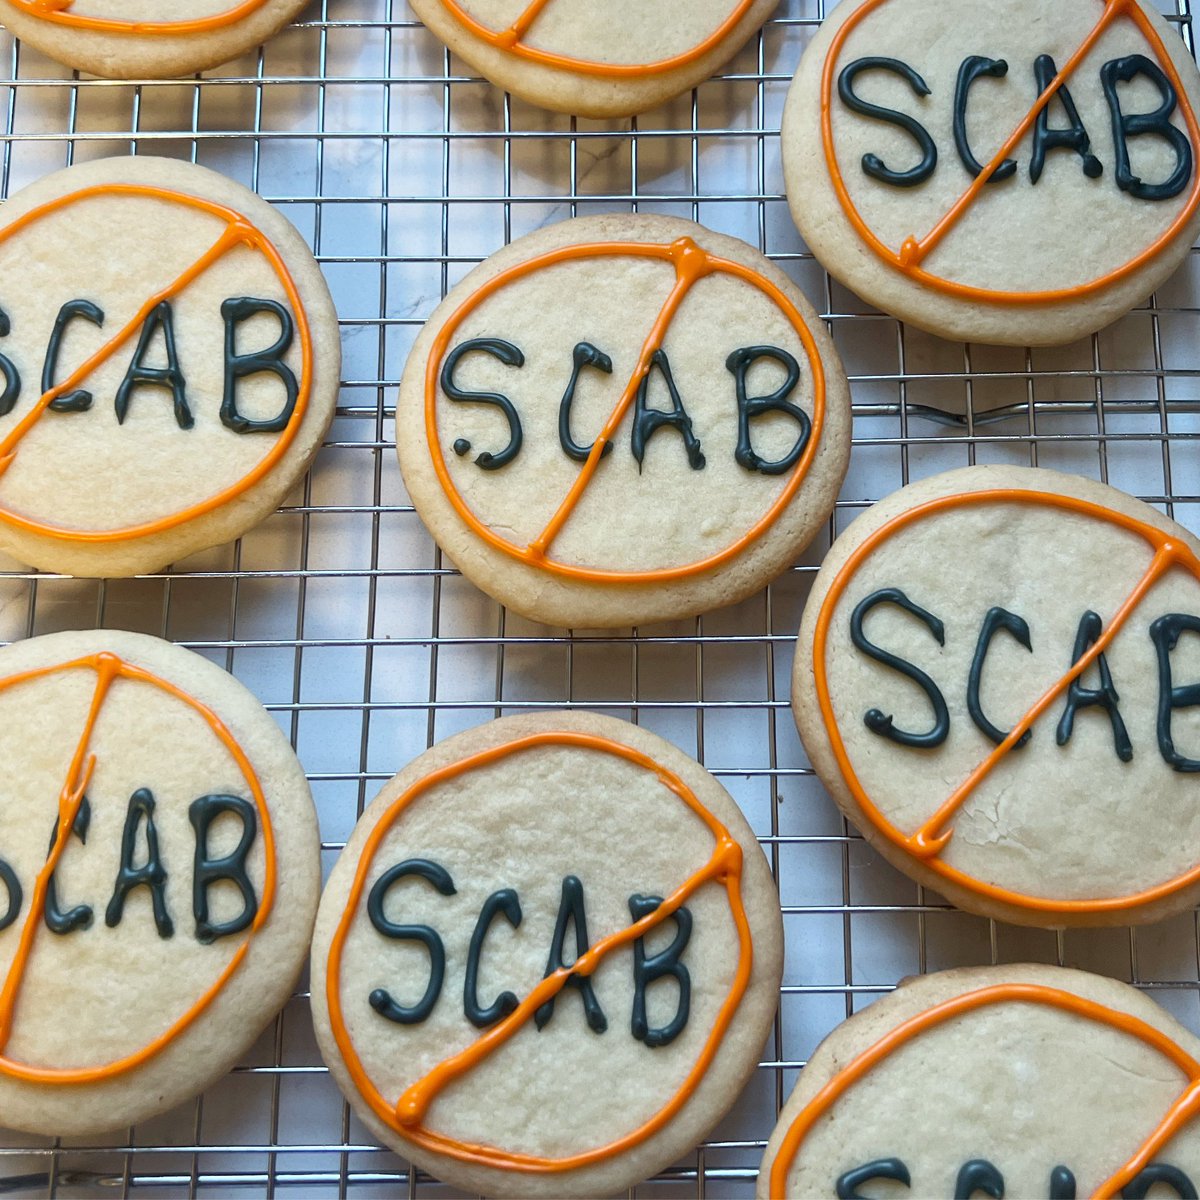 In honour of the huge @NDP win today getting anti-SCAB legislation passed for federal workers, I give you a throwback to the anti-SCAB cookies I baked when the legislation was tabled. Todays a great day for federal workers! Proud to be a New Democrat today.